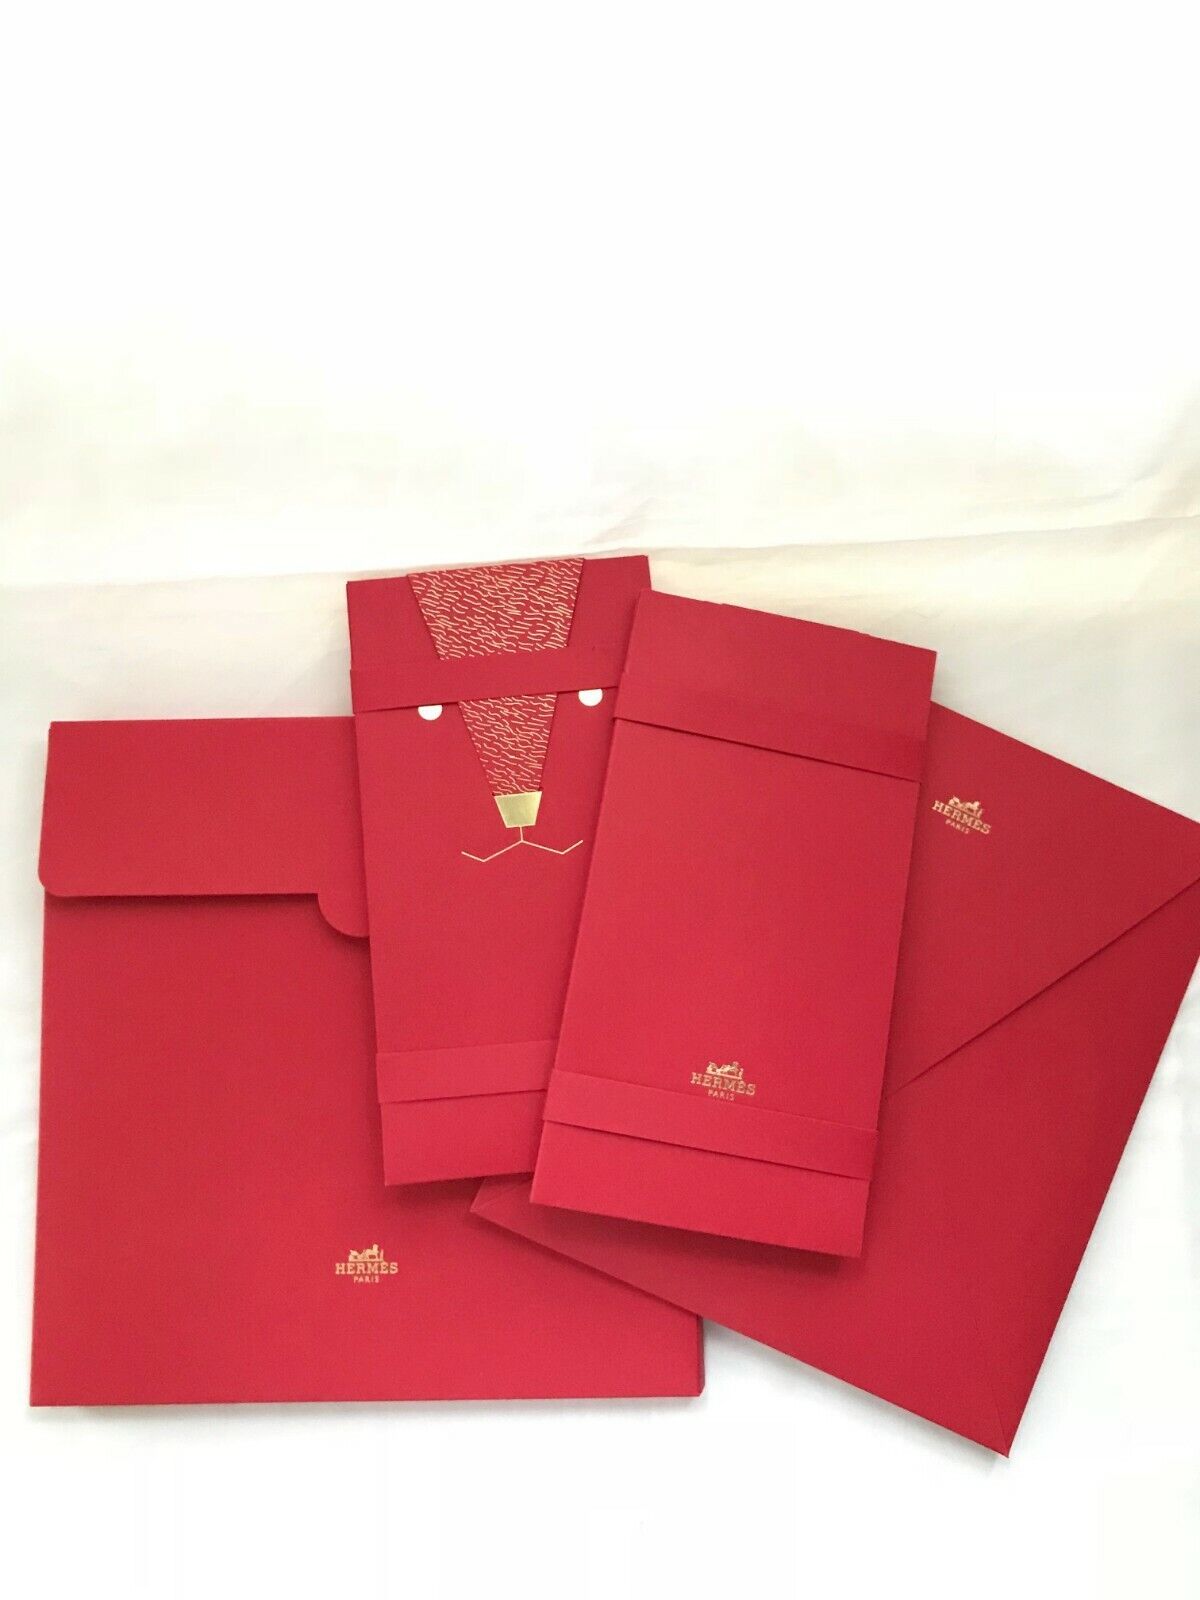 Hermes 2018 red packet envelope for trio kelly constance wallet petit h charm